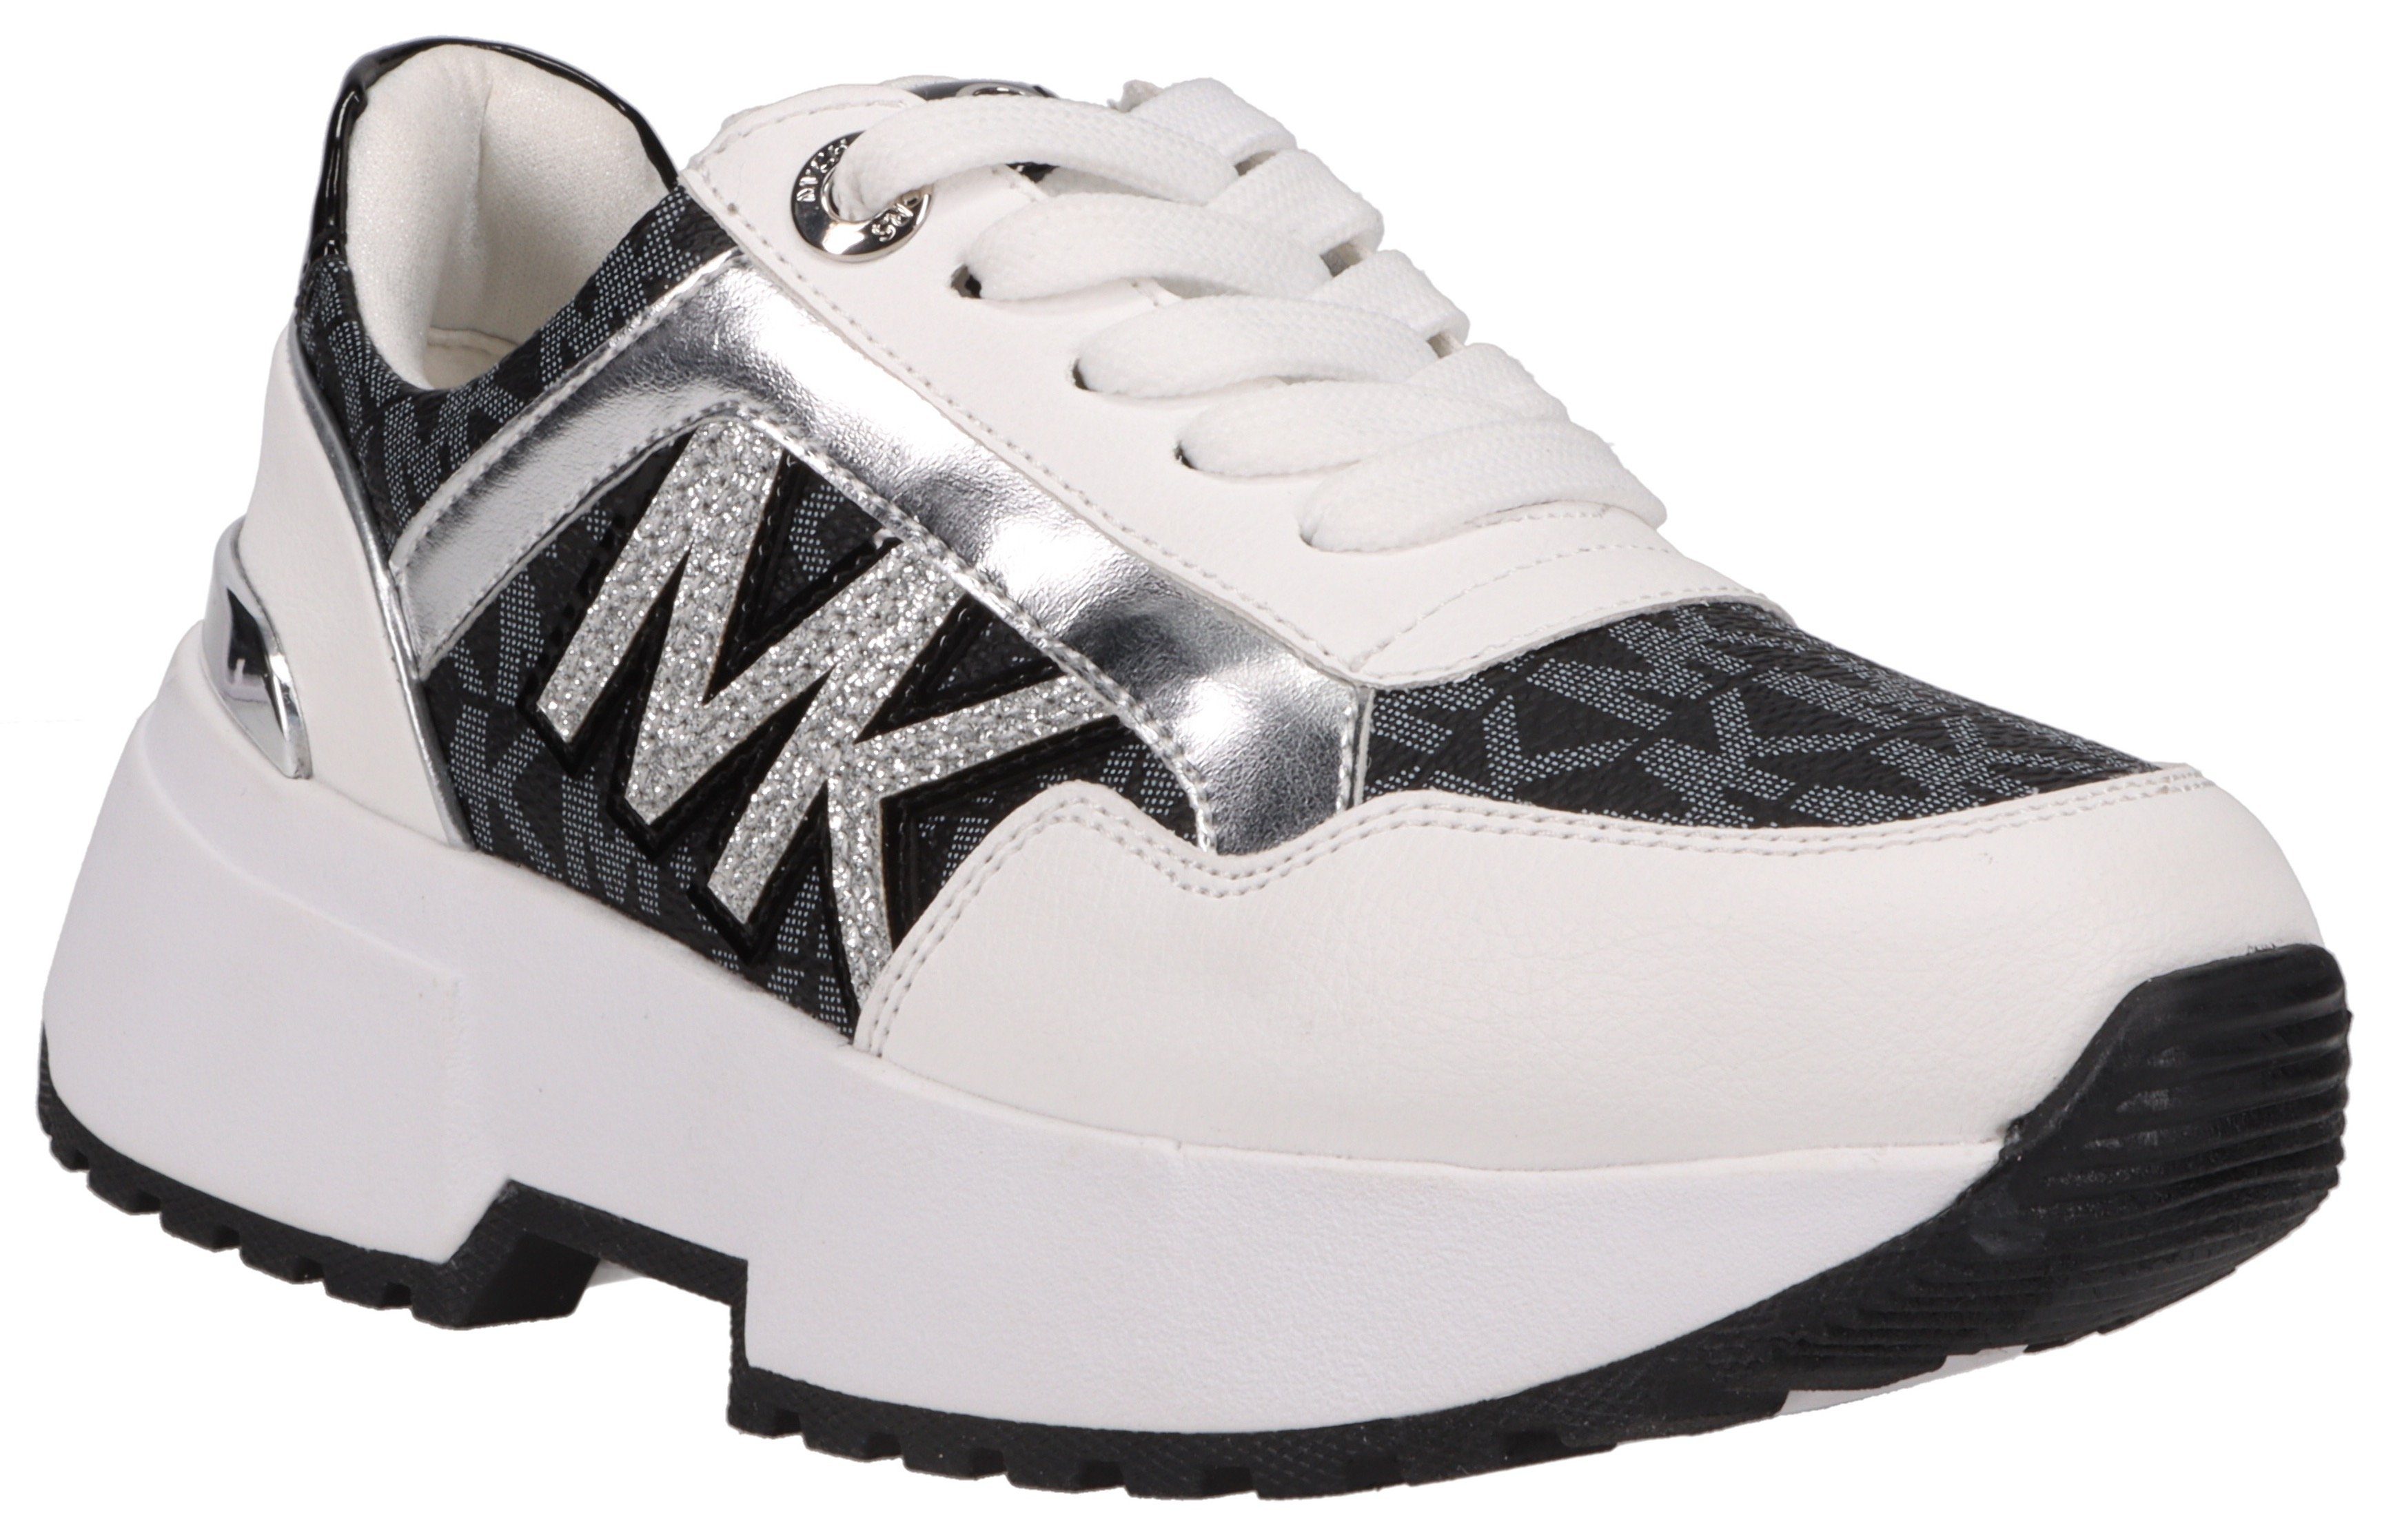 MICHAEL KORS KIDS Sneaker Cosmo Plateausneaker Maddy Chunky-Laufsohle mit